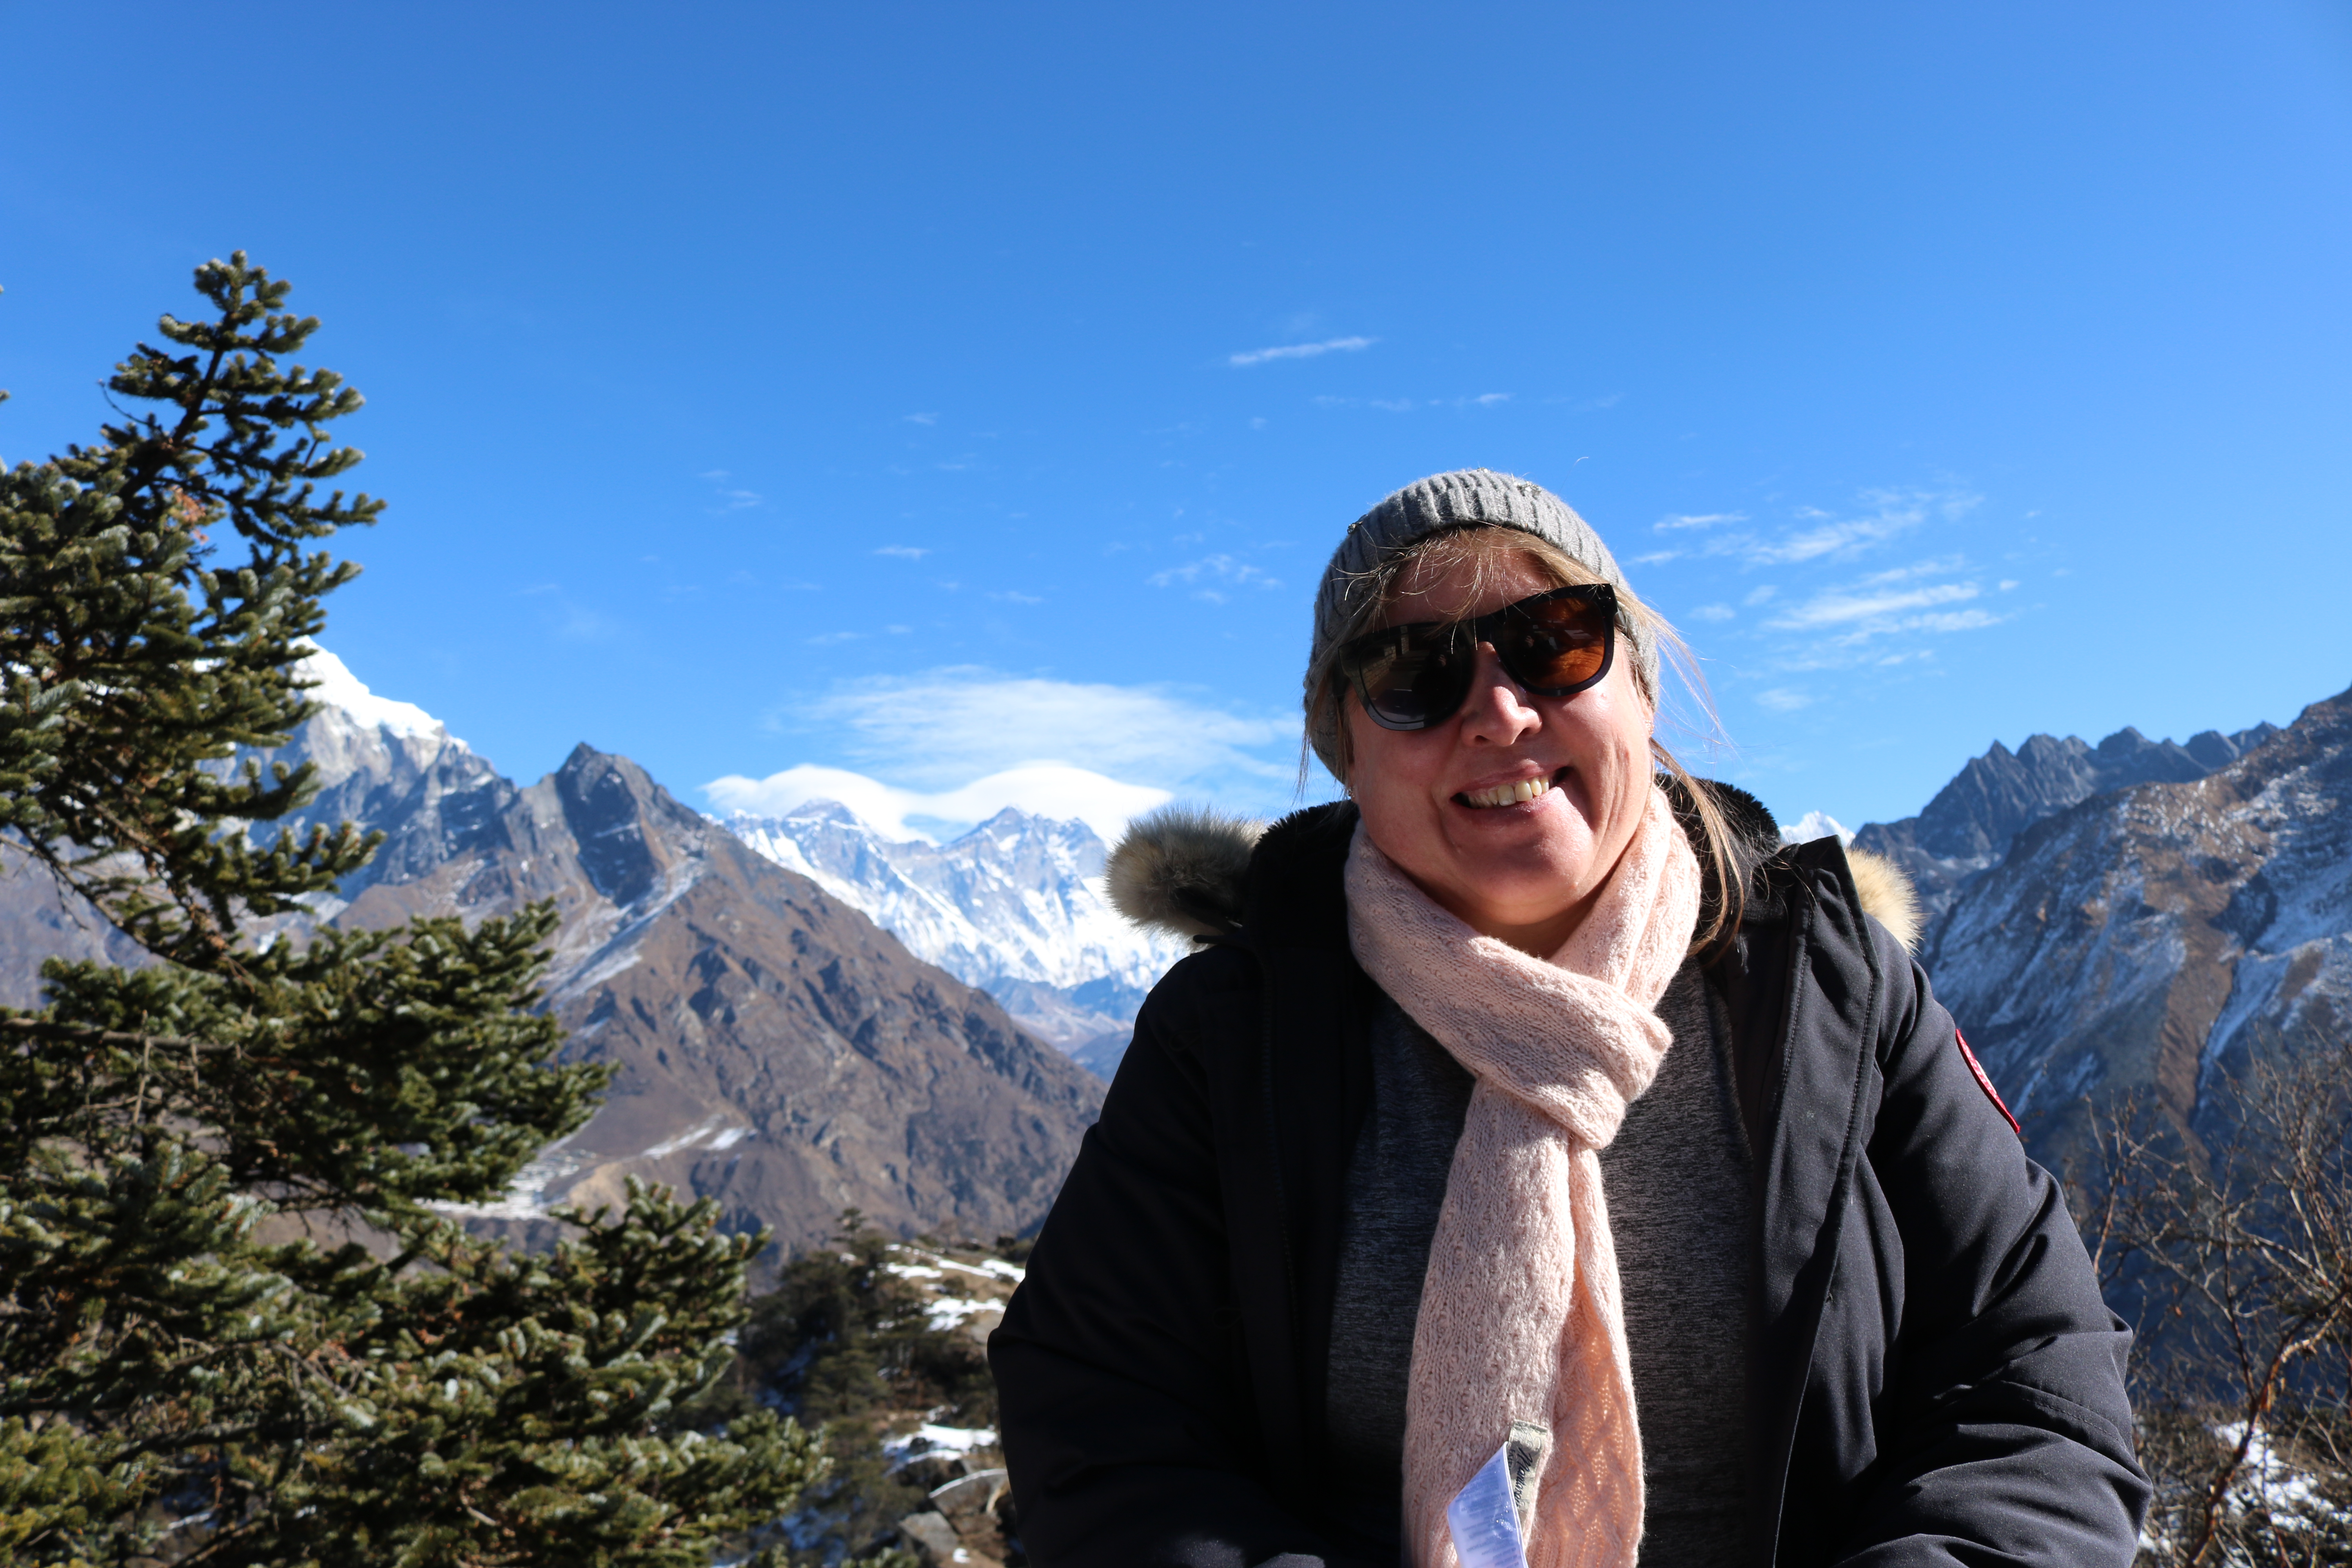 Lisa standing in front of a snowy mountain vally